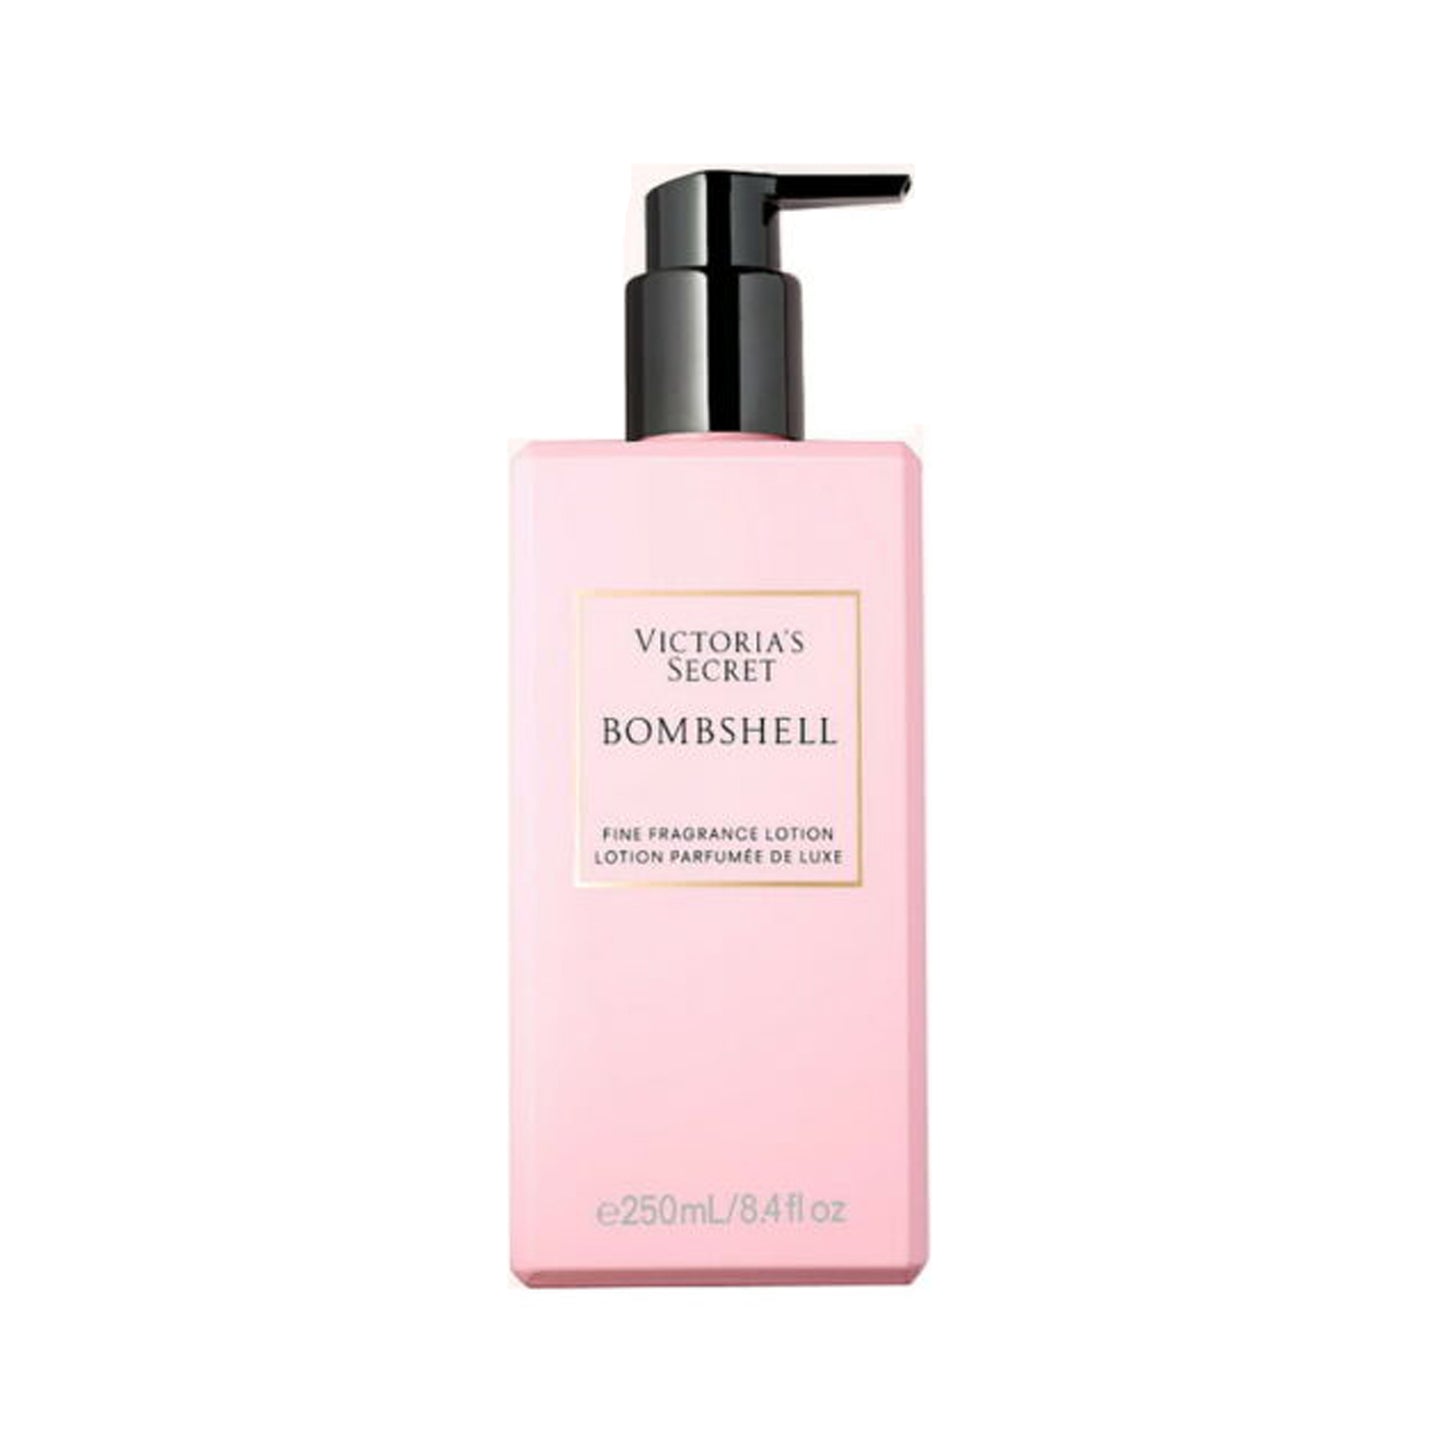 Shop Victoria's Secret original Bombshell lotion available at Heygirl.pk for delivery in Pakistan